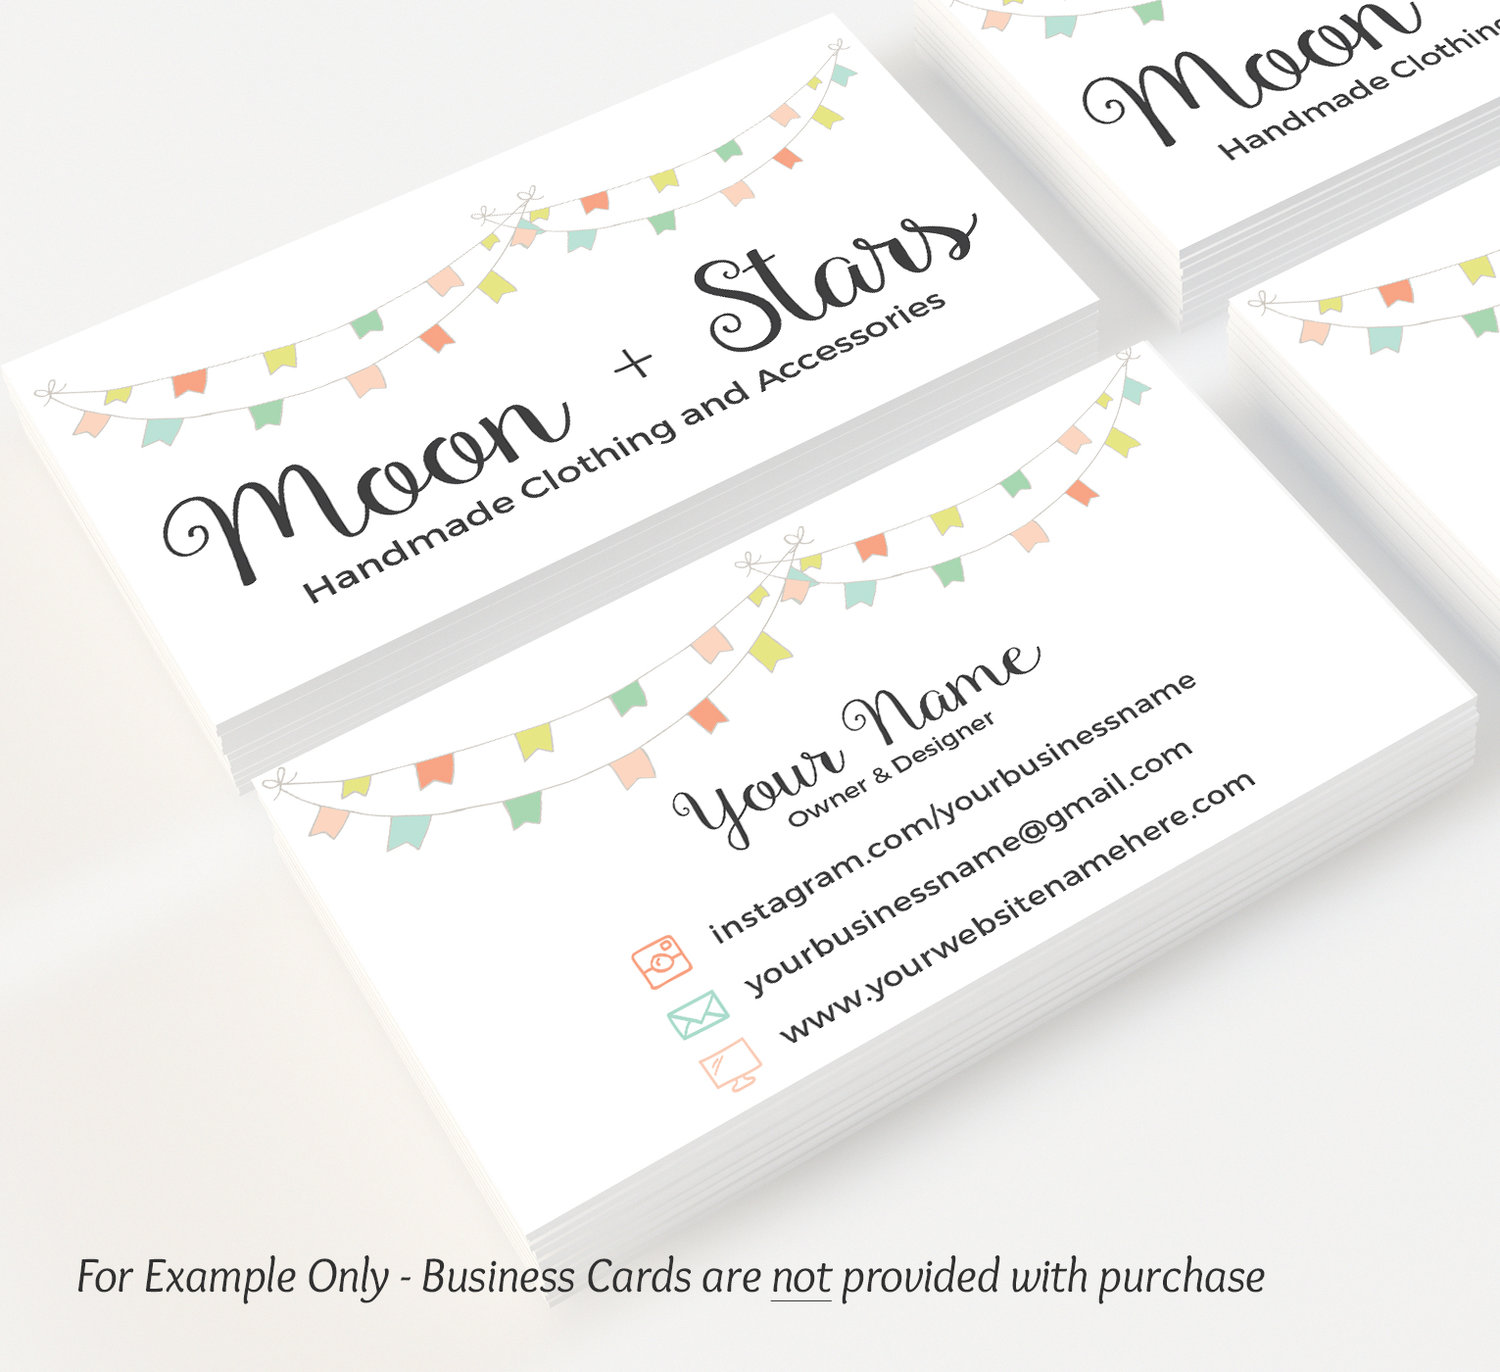 Bunting Business Card Design Customized With Your Business Information Ramble Road Studios